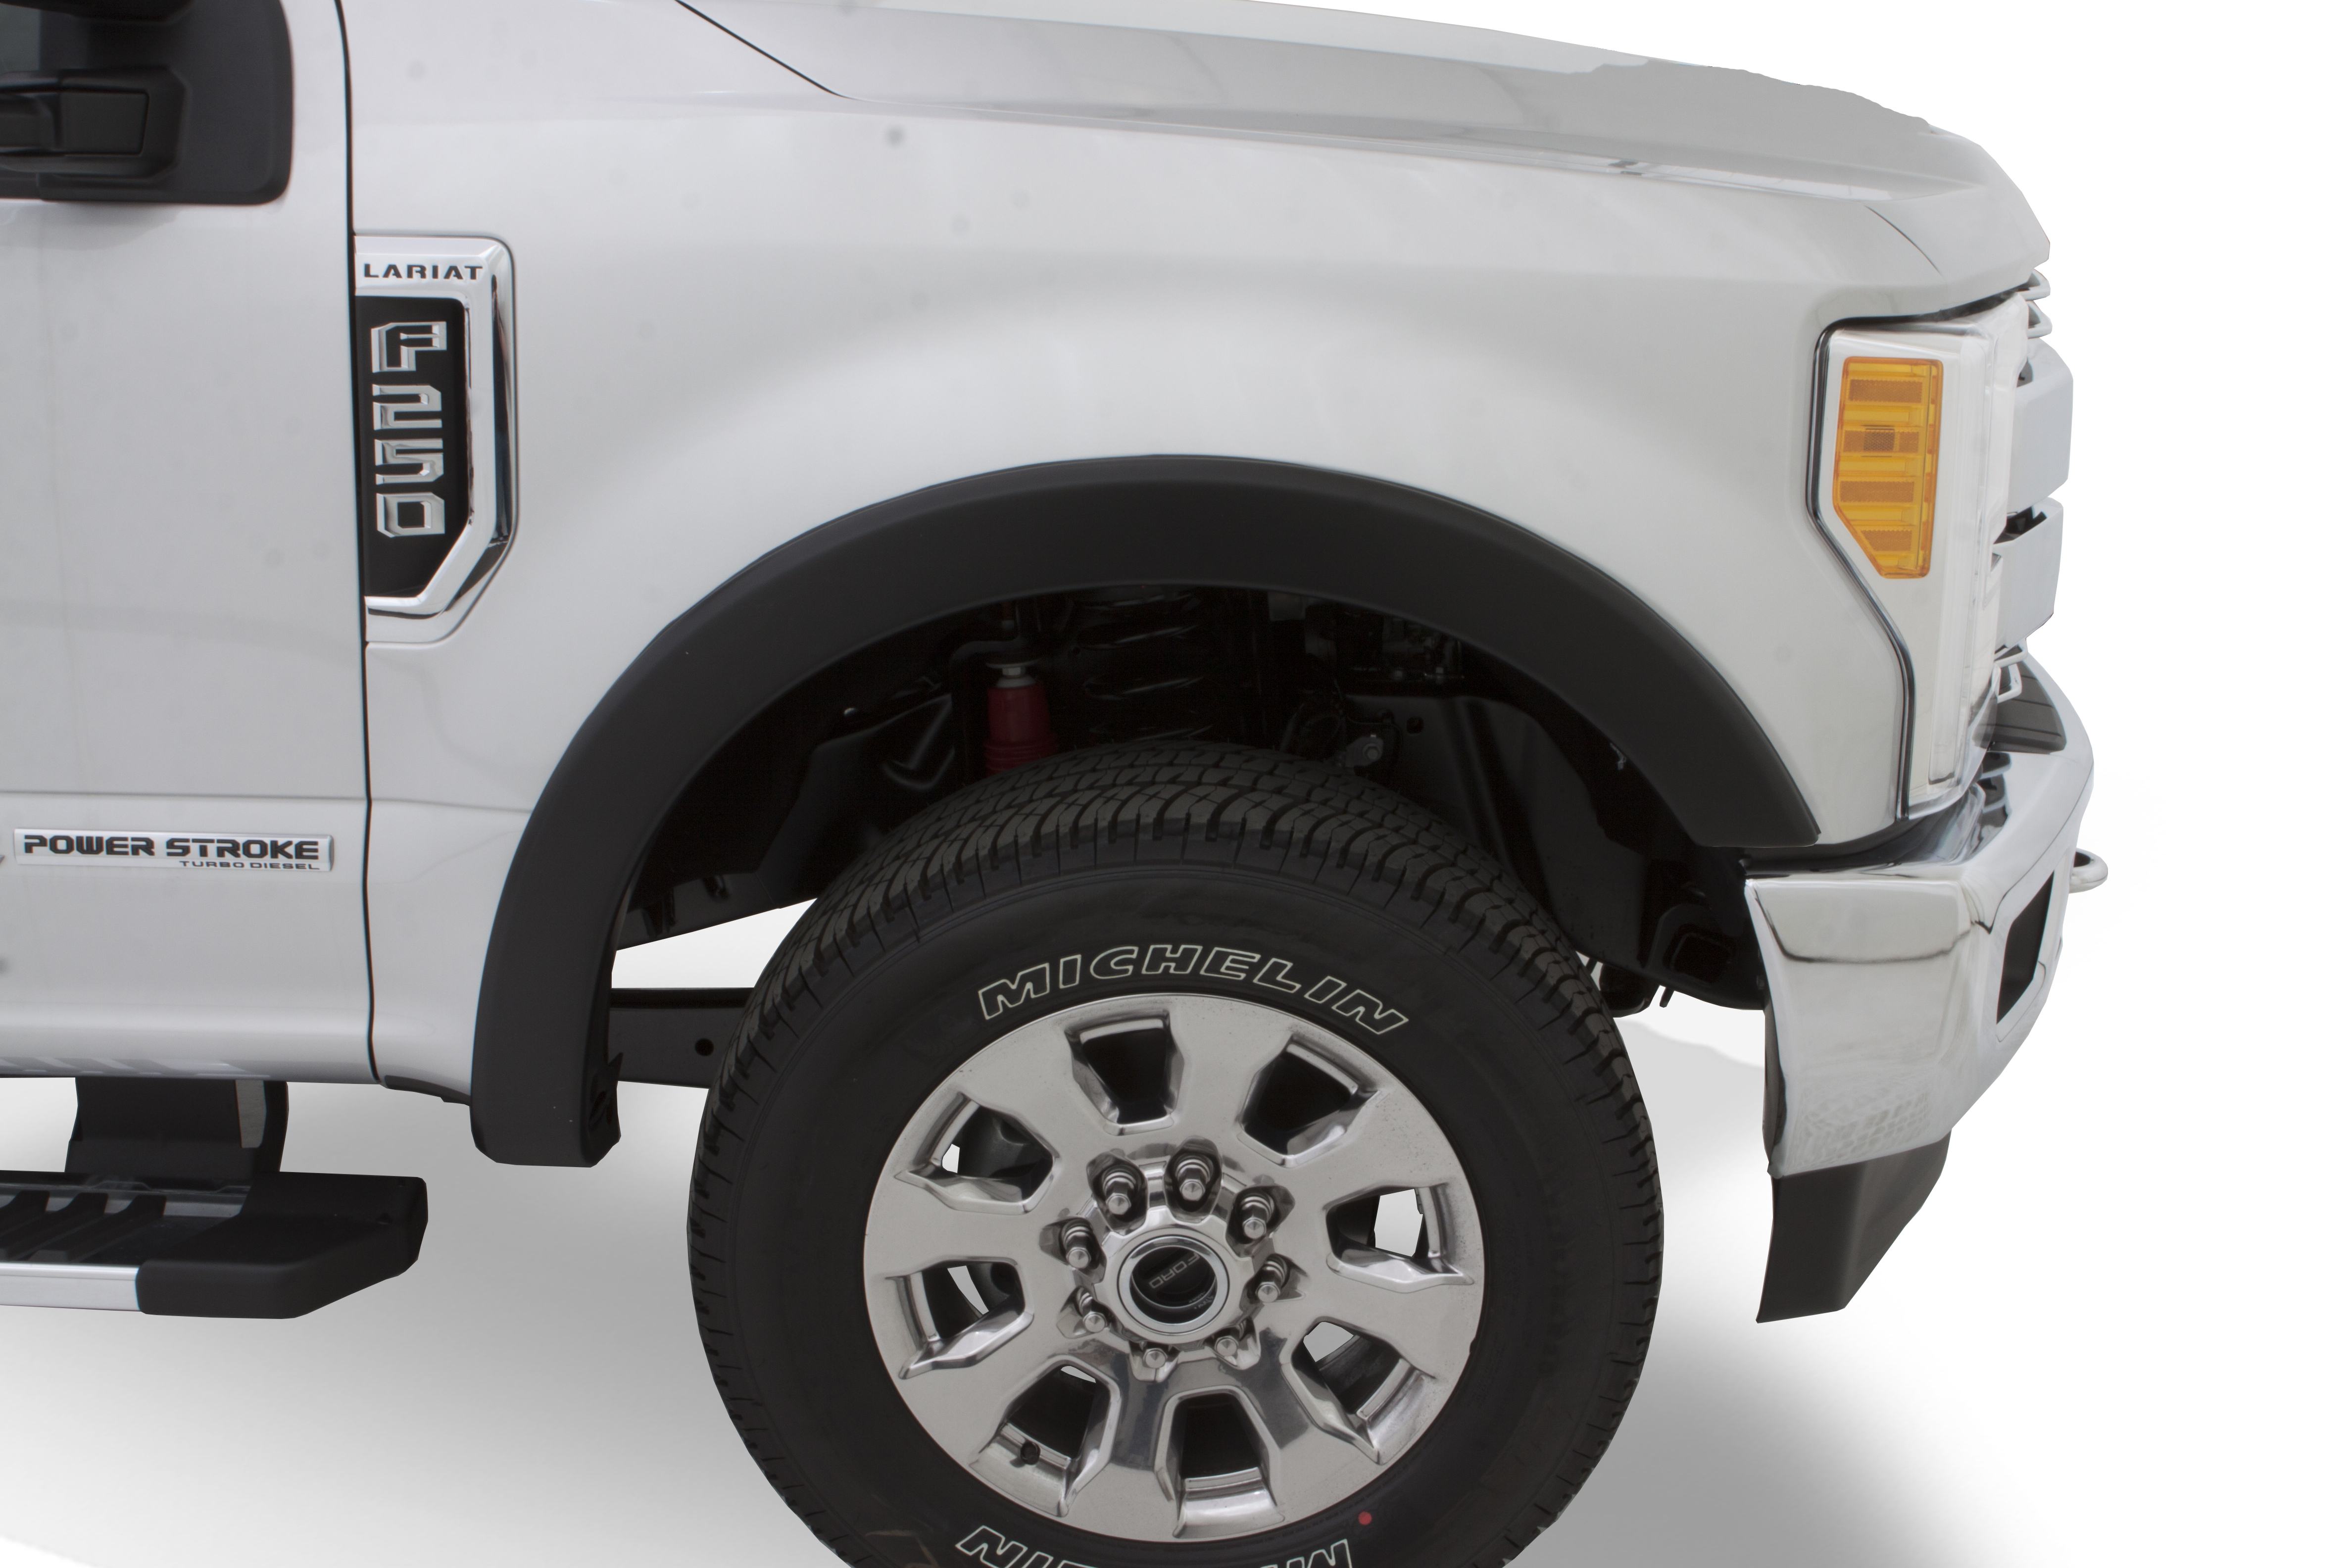 Bushwacker 20057-02 Black OE-Style Smooth Finish Front Fender Flares for 1999-2010 Ford F-250 Super Duty; 2008-2010 F-350 Super Duty